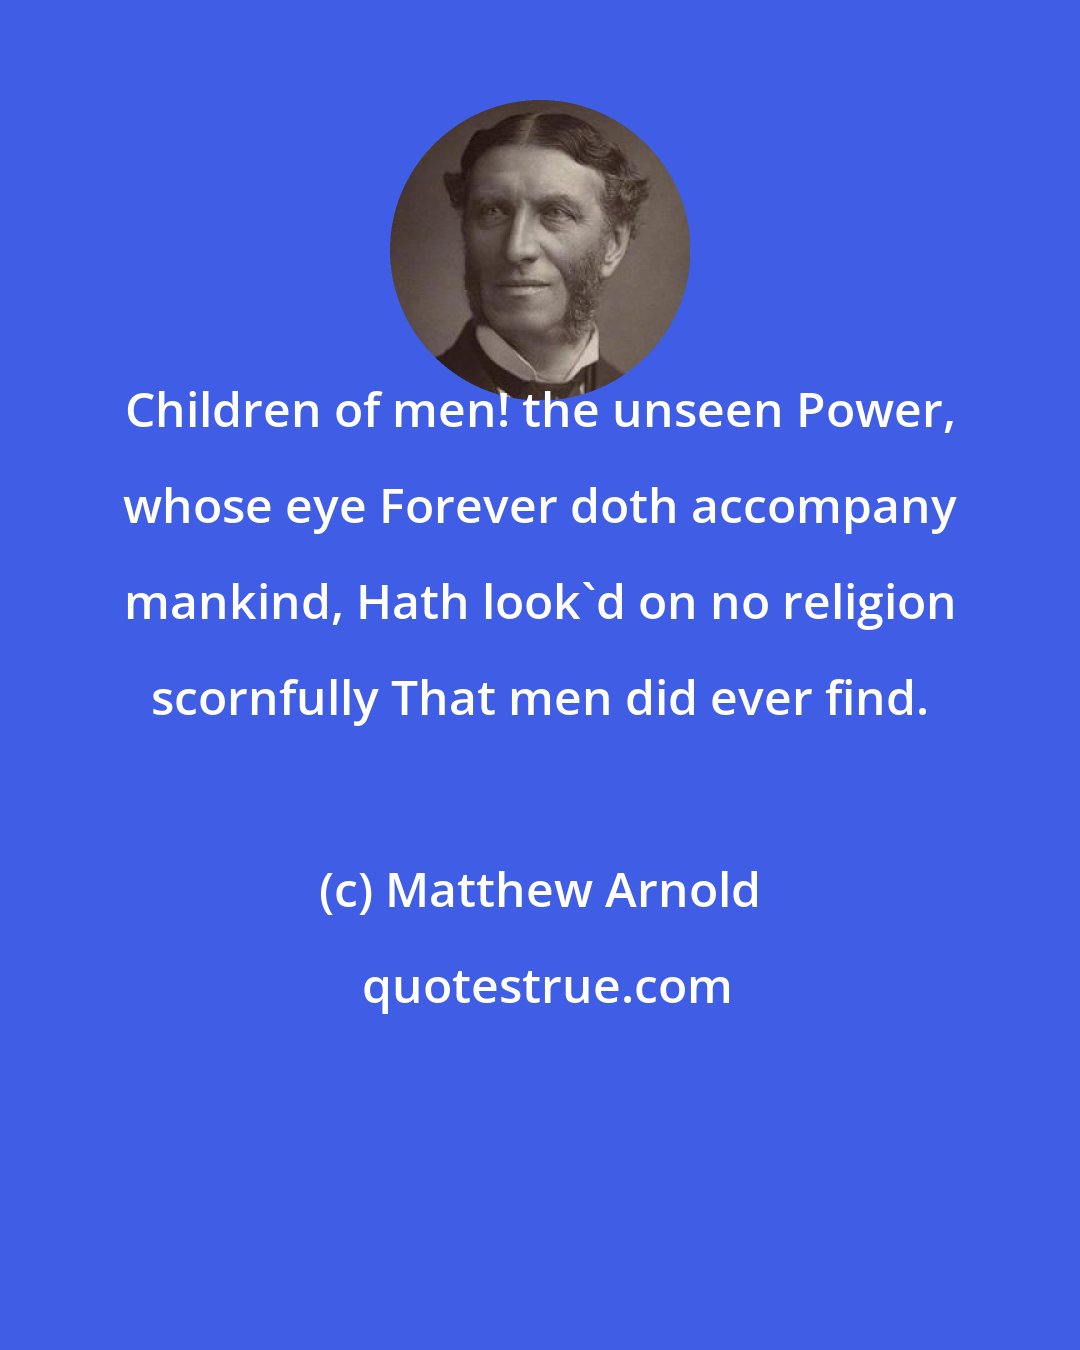 Matthew Arnold: Children of men! the unseen Power, whose eye Forever doth accompany mankind, Hath look'd on no religion scornfully That men did ever find.